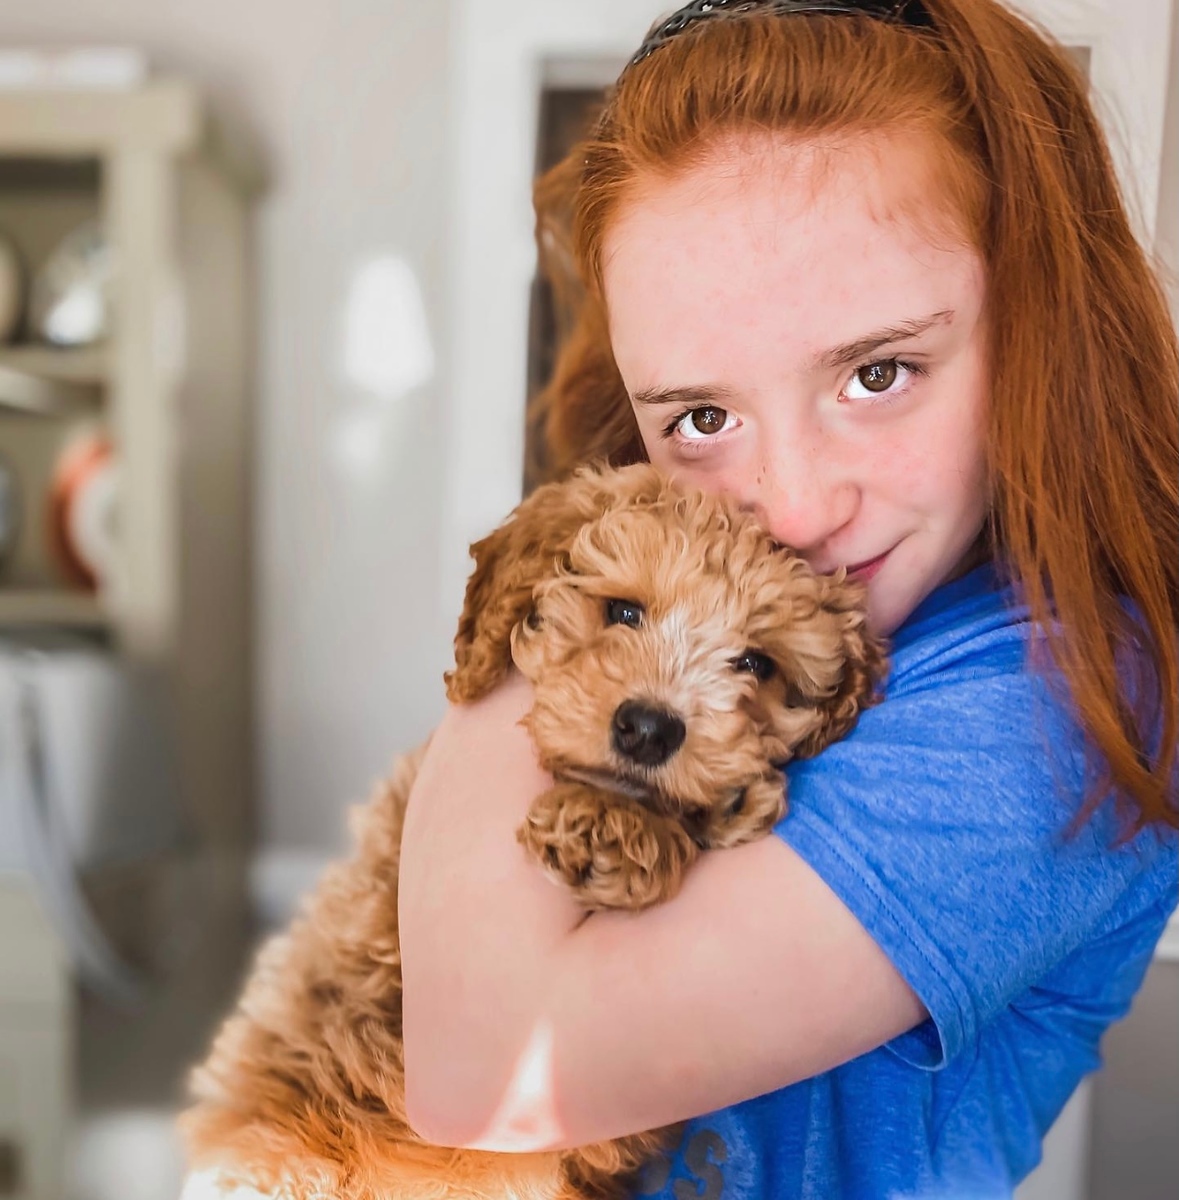 temperament testing in puppies doodle puppy red haired girl hug